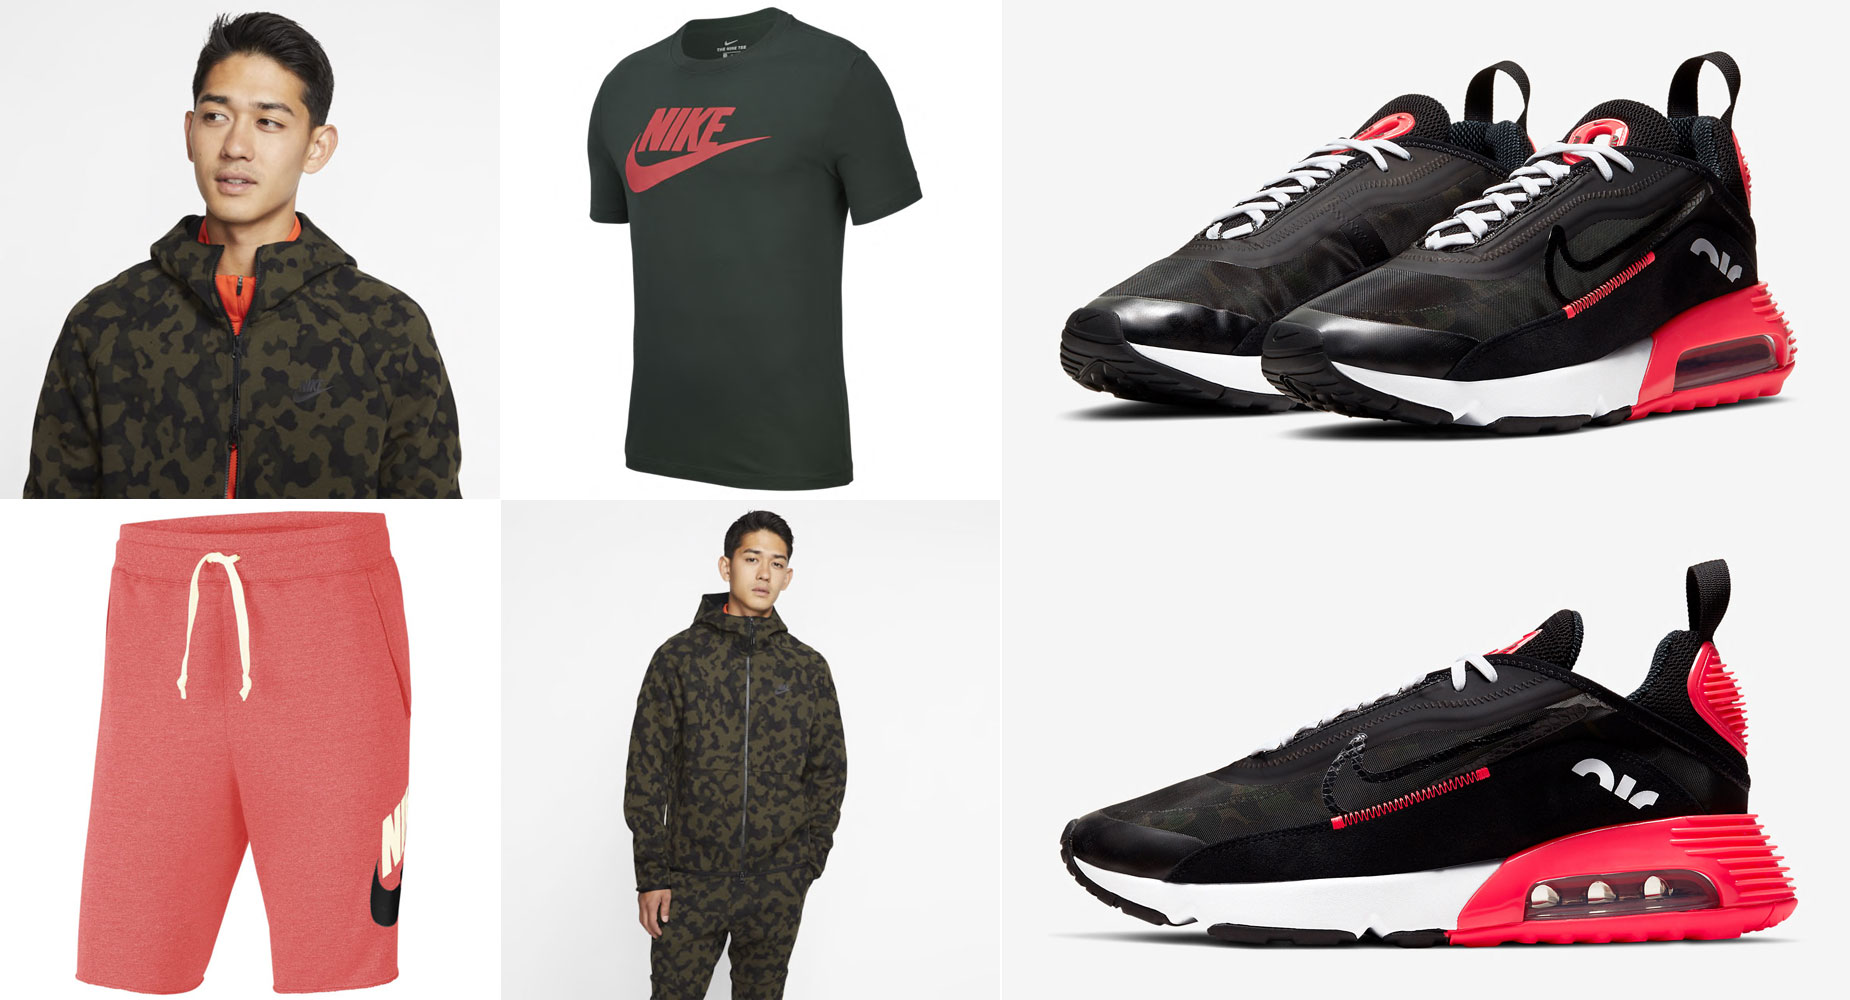 nike-air-max-2090-infrared-duck-camo-clothing-outfits